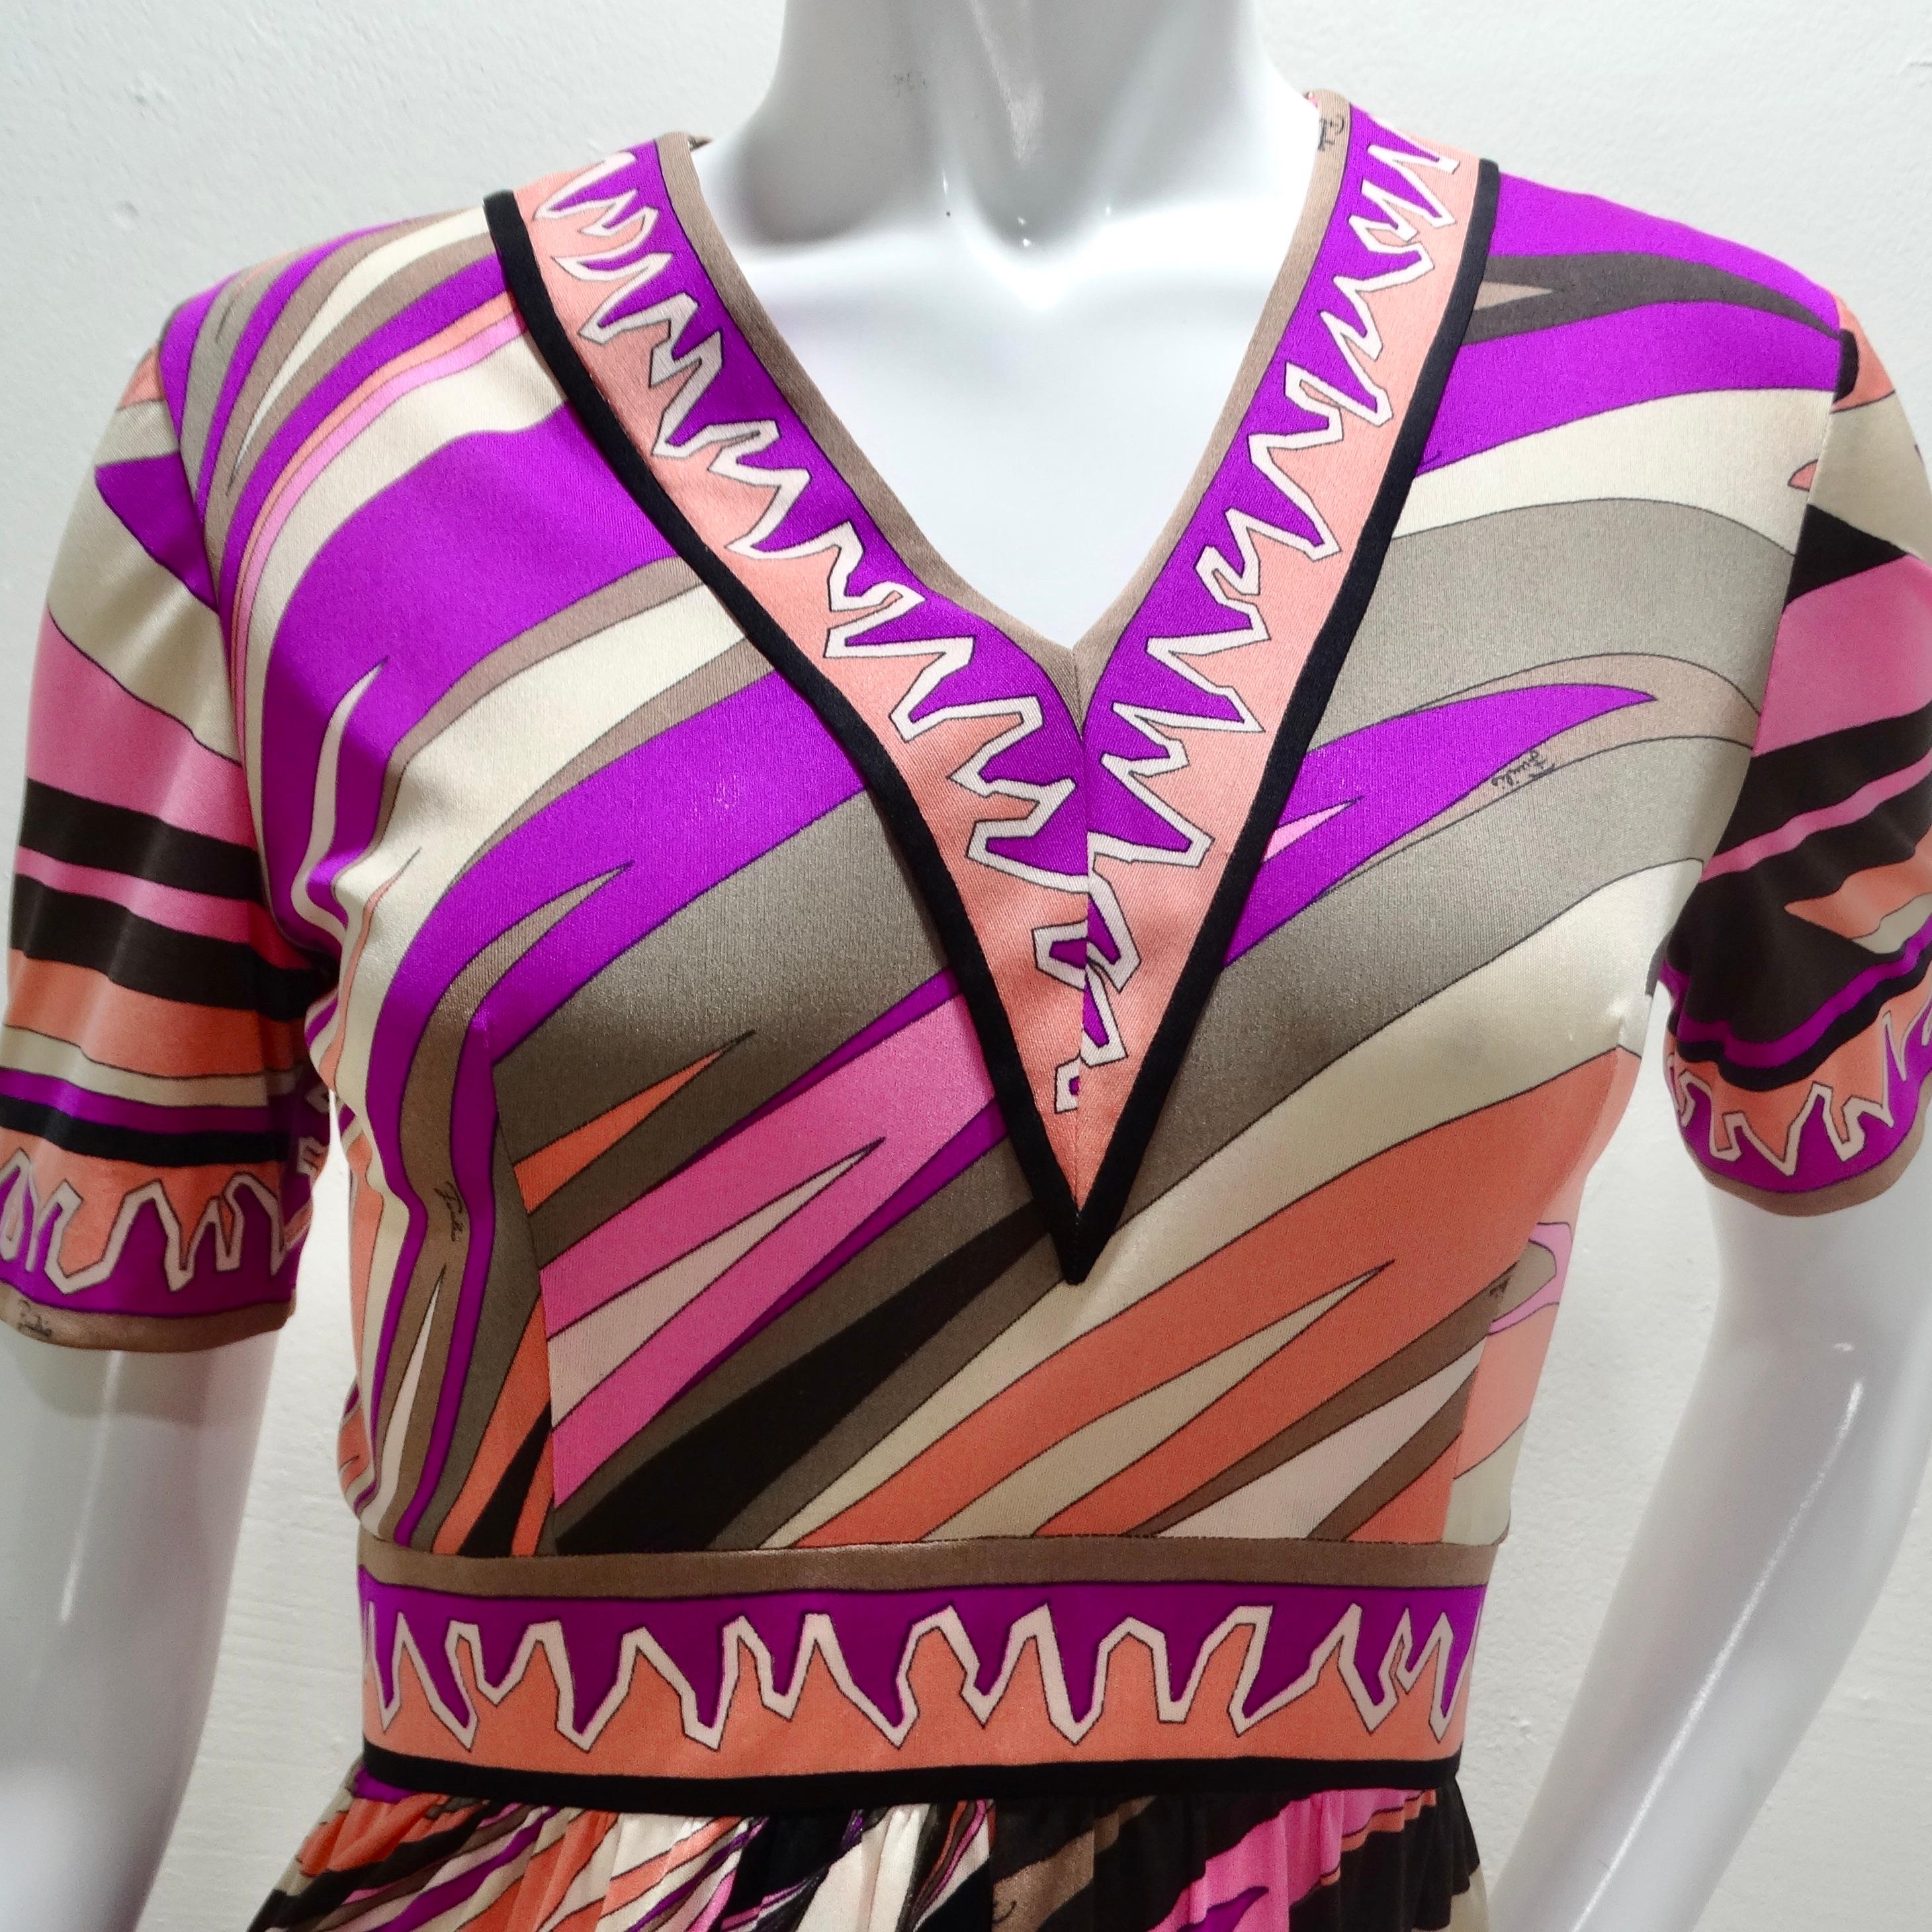 Get your hands on the Pucci 1960s Printed Multicolor Dress! This vintage masterpiece encapsulates the essence of 1960s fashion, combining style, comfort, and a signature Pucci print that's sure to transport you back to an era of vibrant glamour.